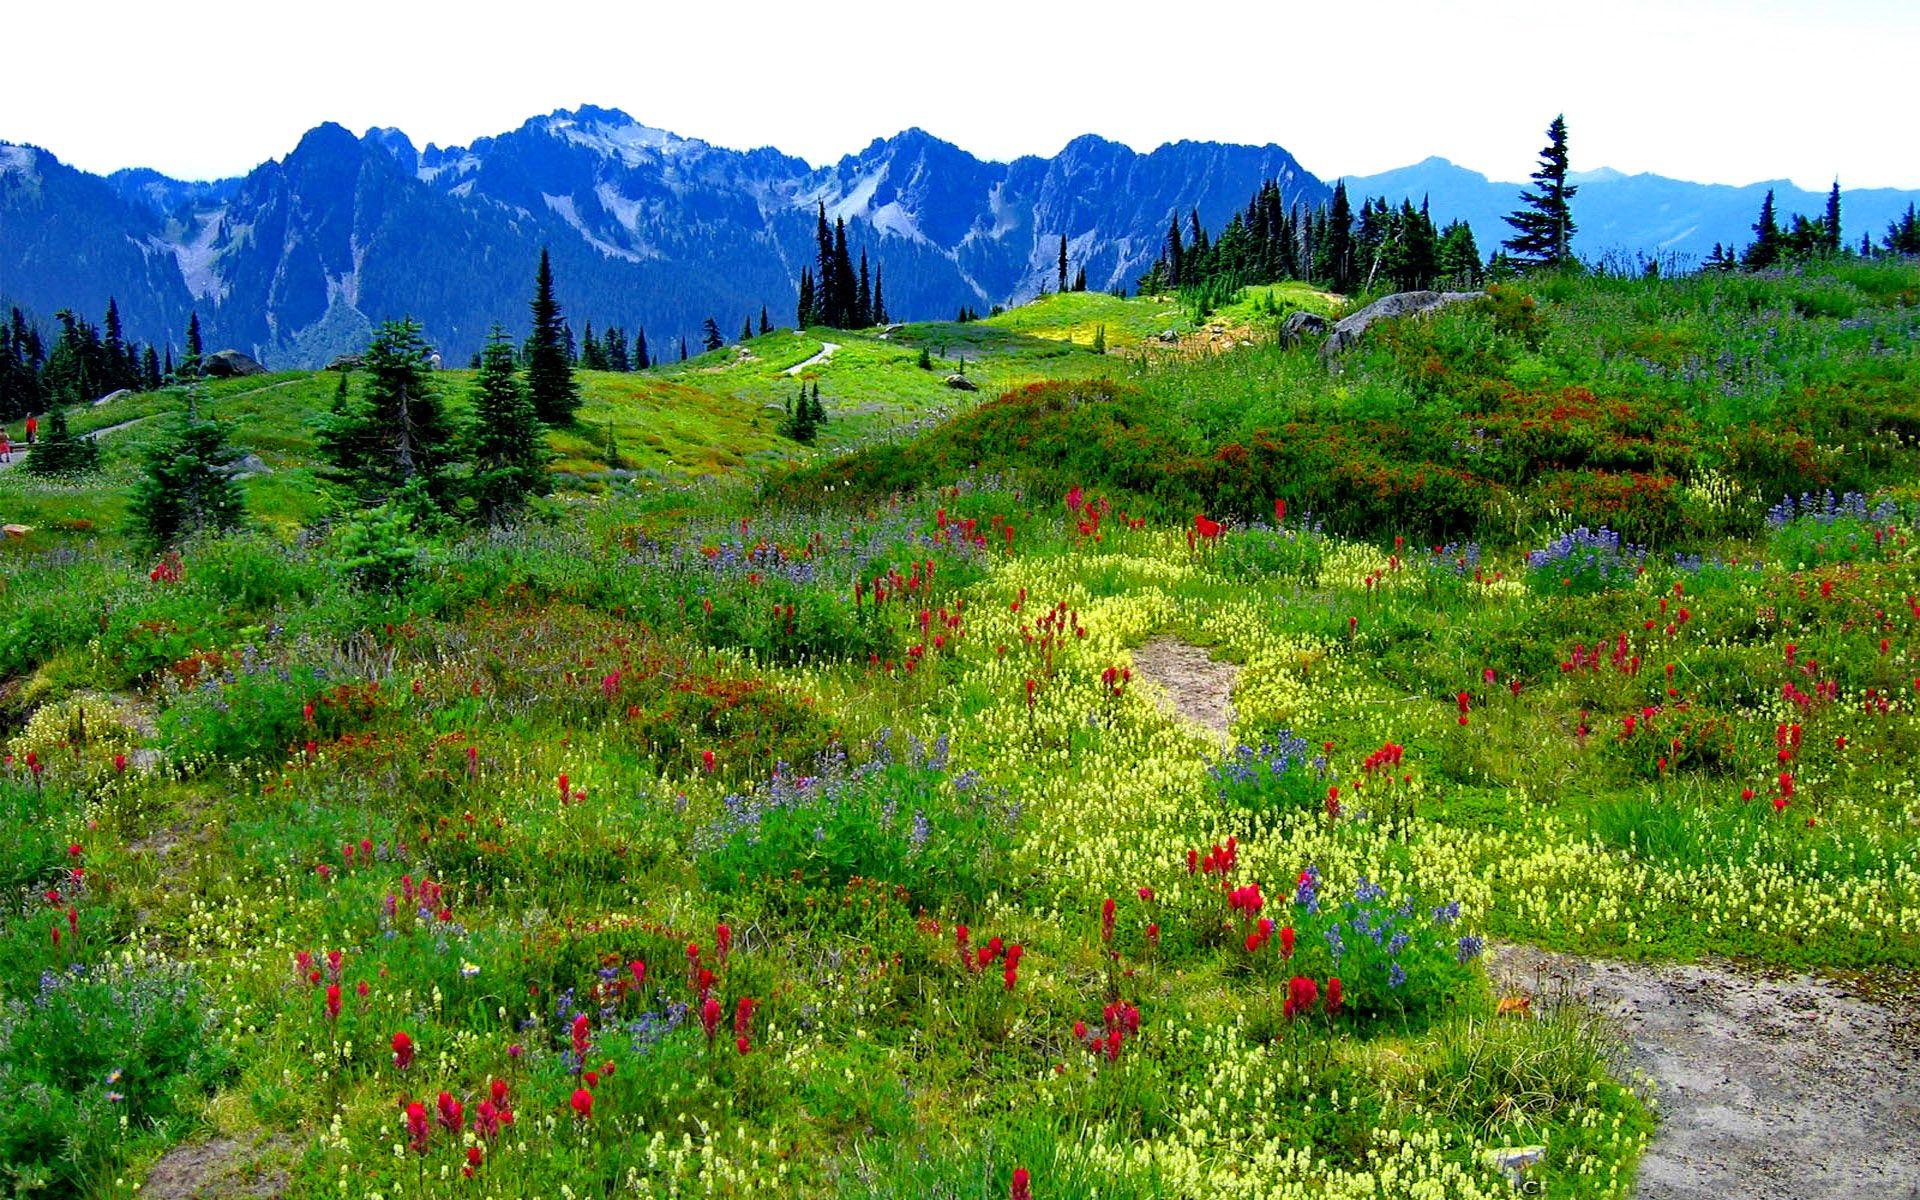 Green Mountain Meadow With Flowers In Multiple Colors, Mountains